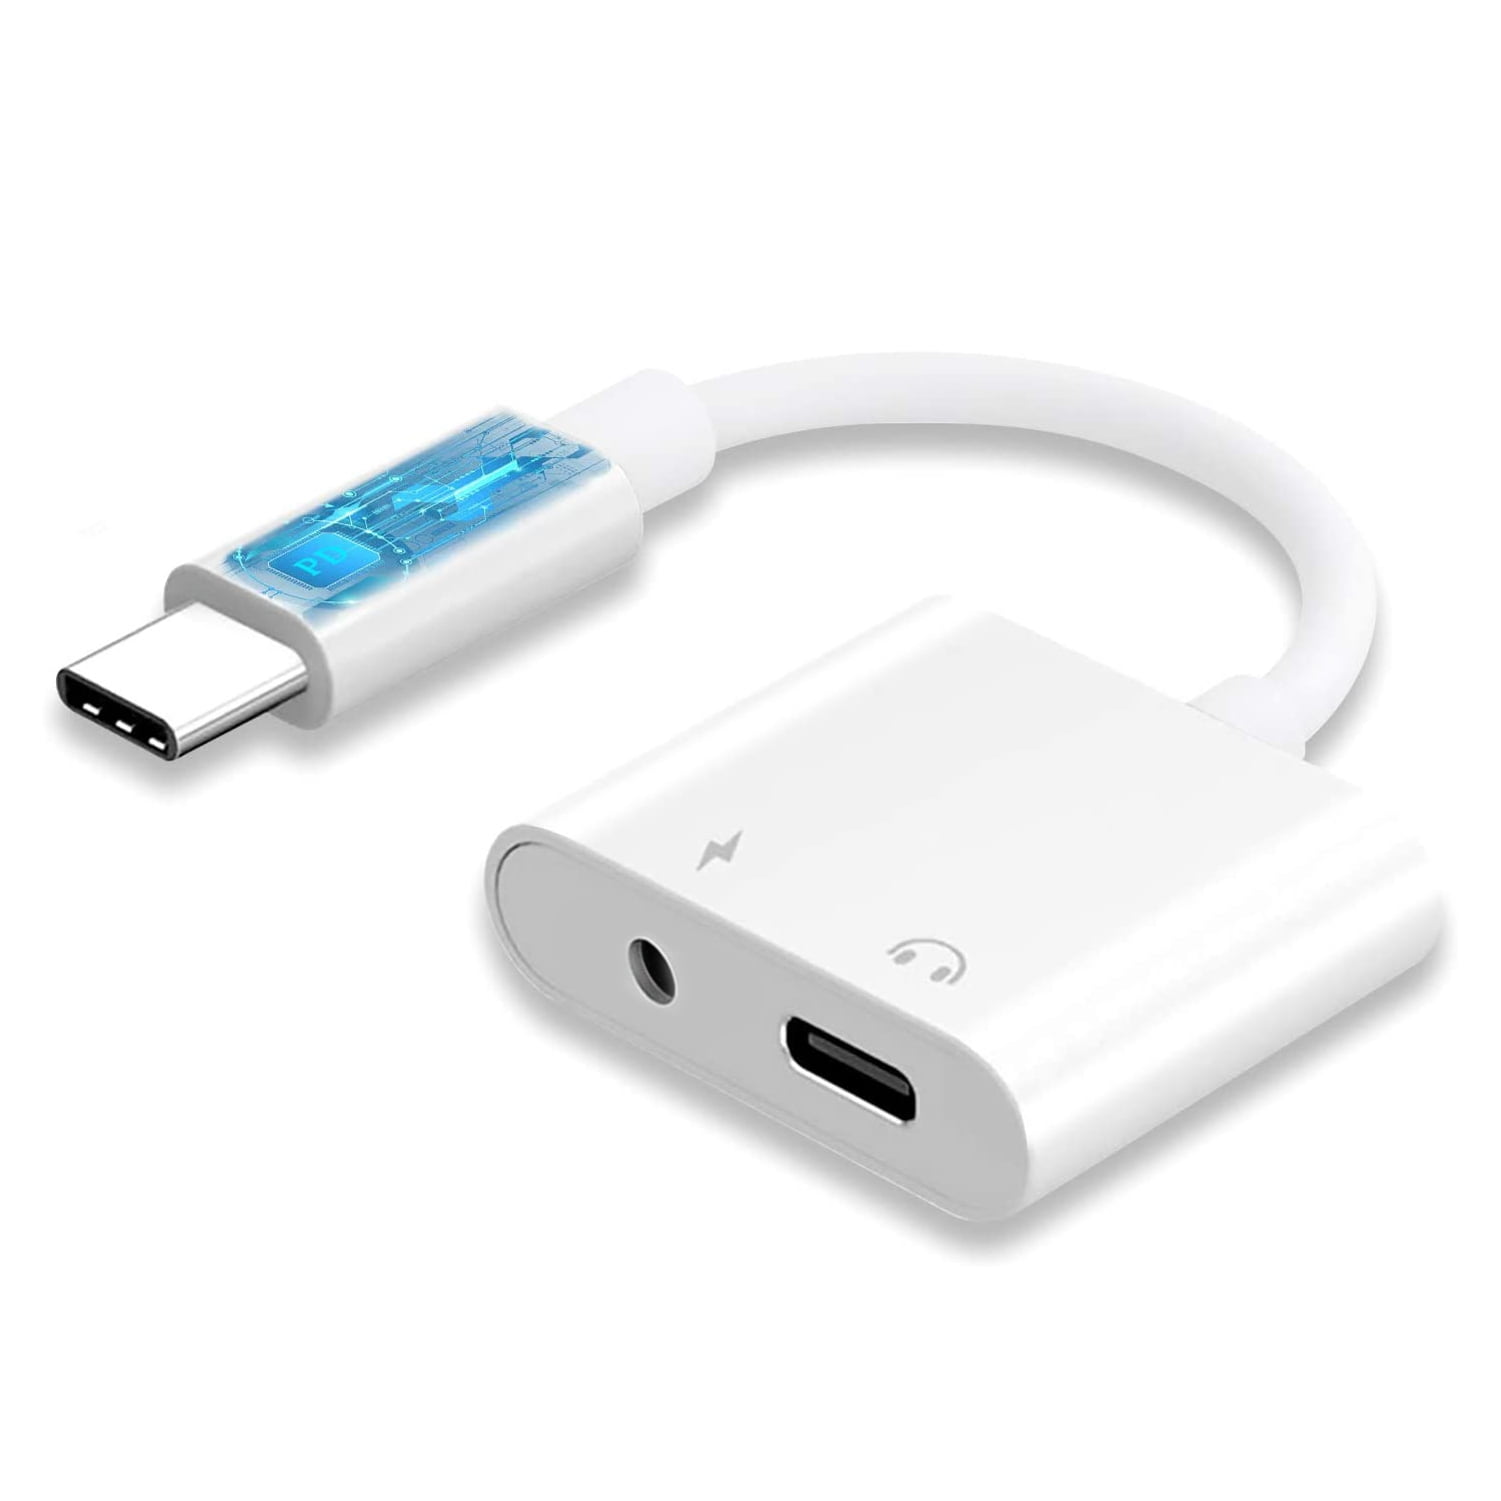 USB-C Headphone Adapter for Note 10/Plus - Earphone 3.5mm Jack Port Splitter Mic Support Hands-free Headset Adaptor L2A Compatible With Galaxy Note 10/Plus - Walmart.com